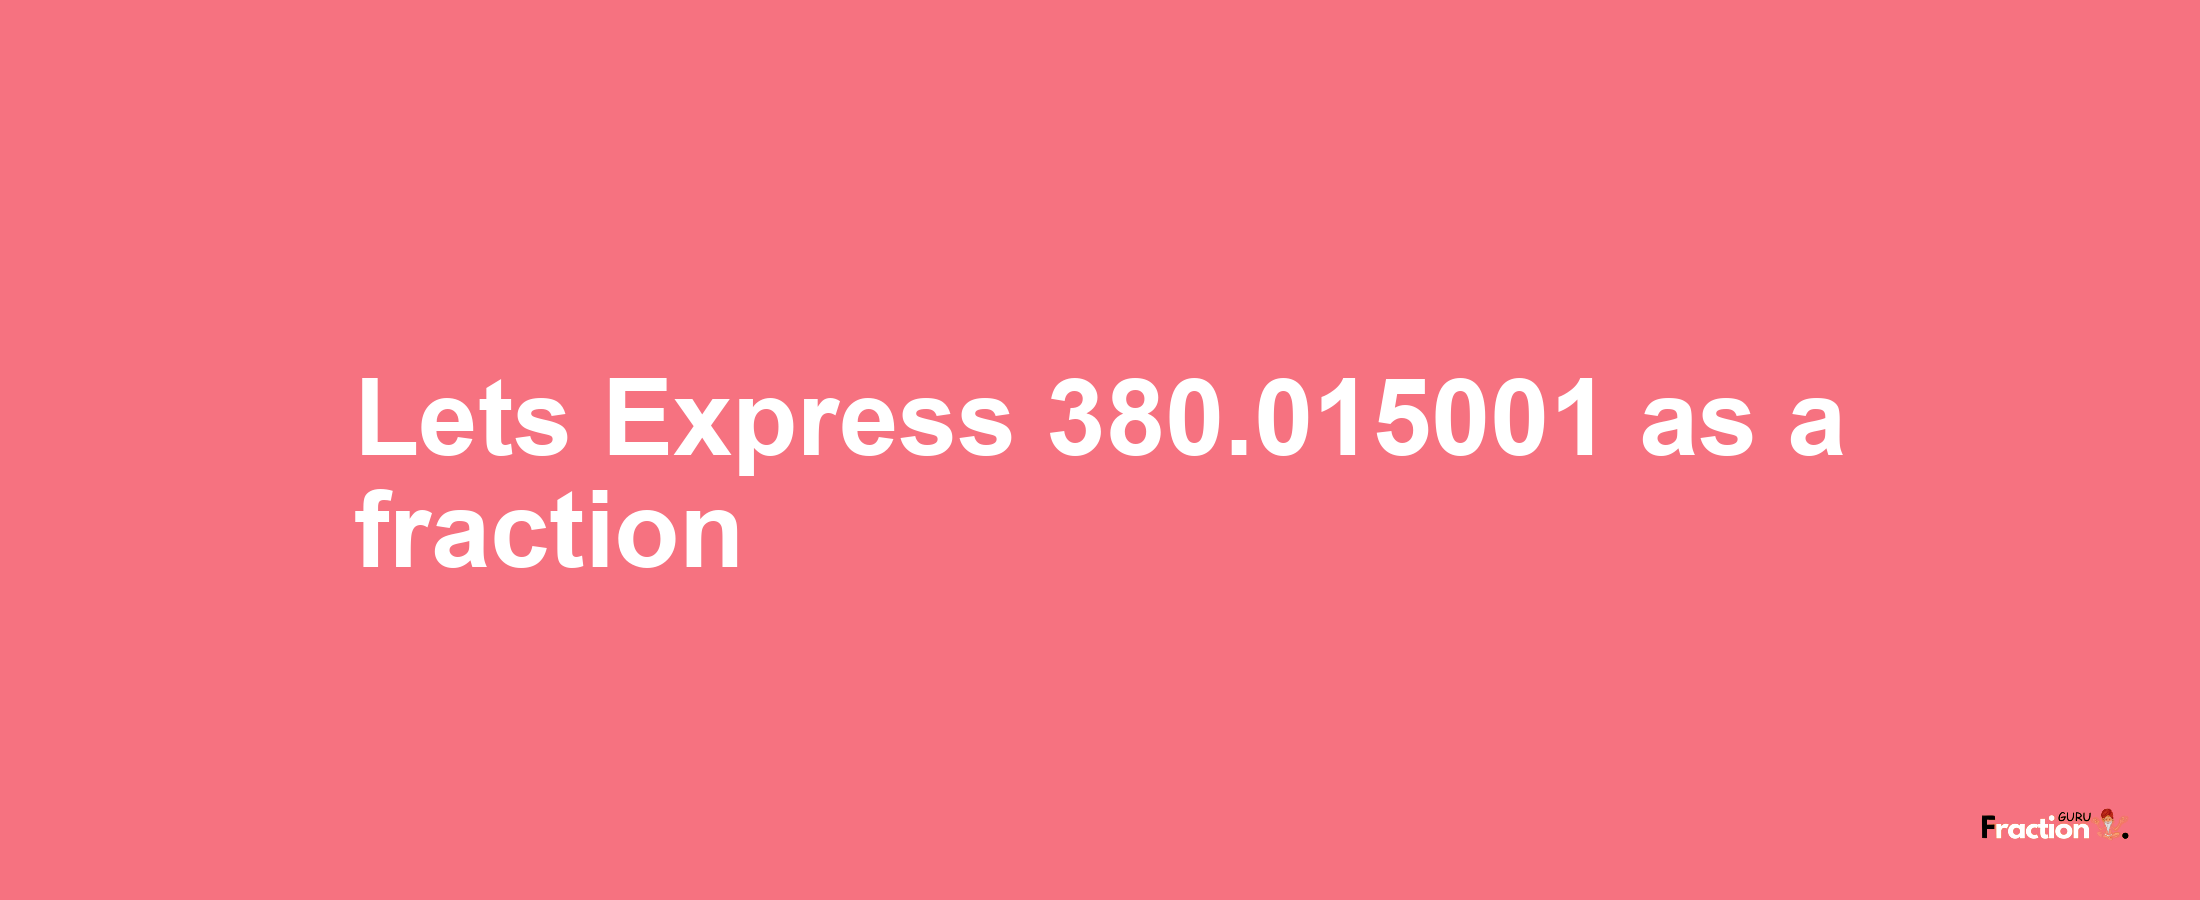 Lets Express 380.015001 as afraction